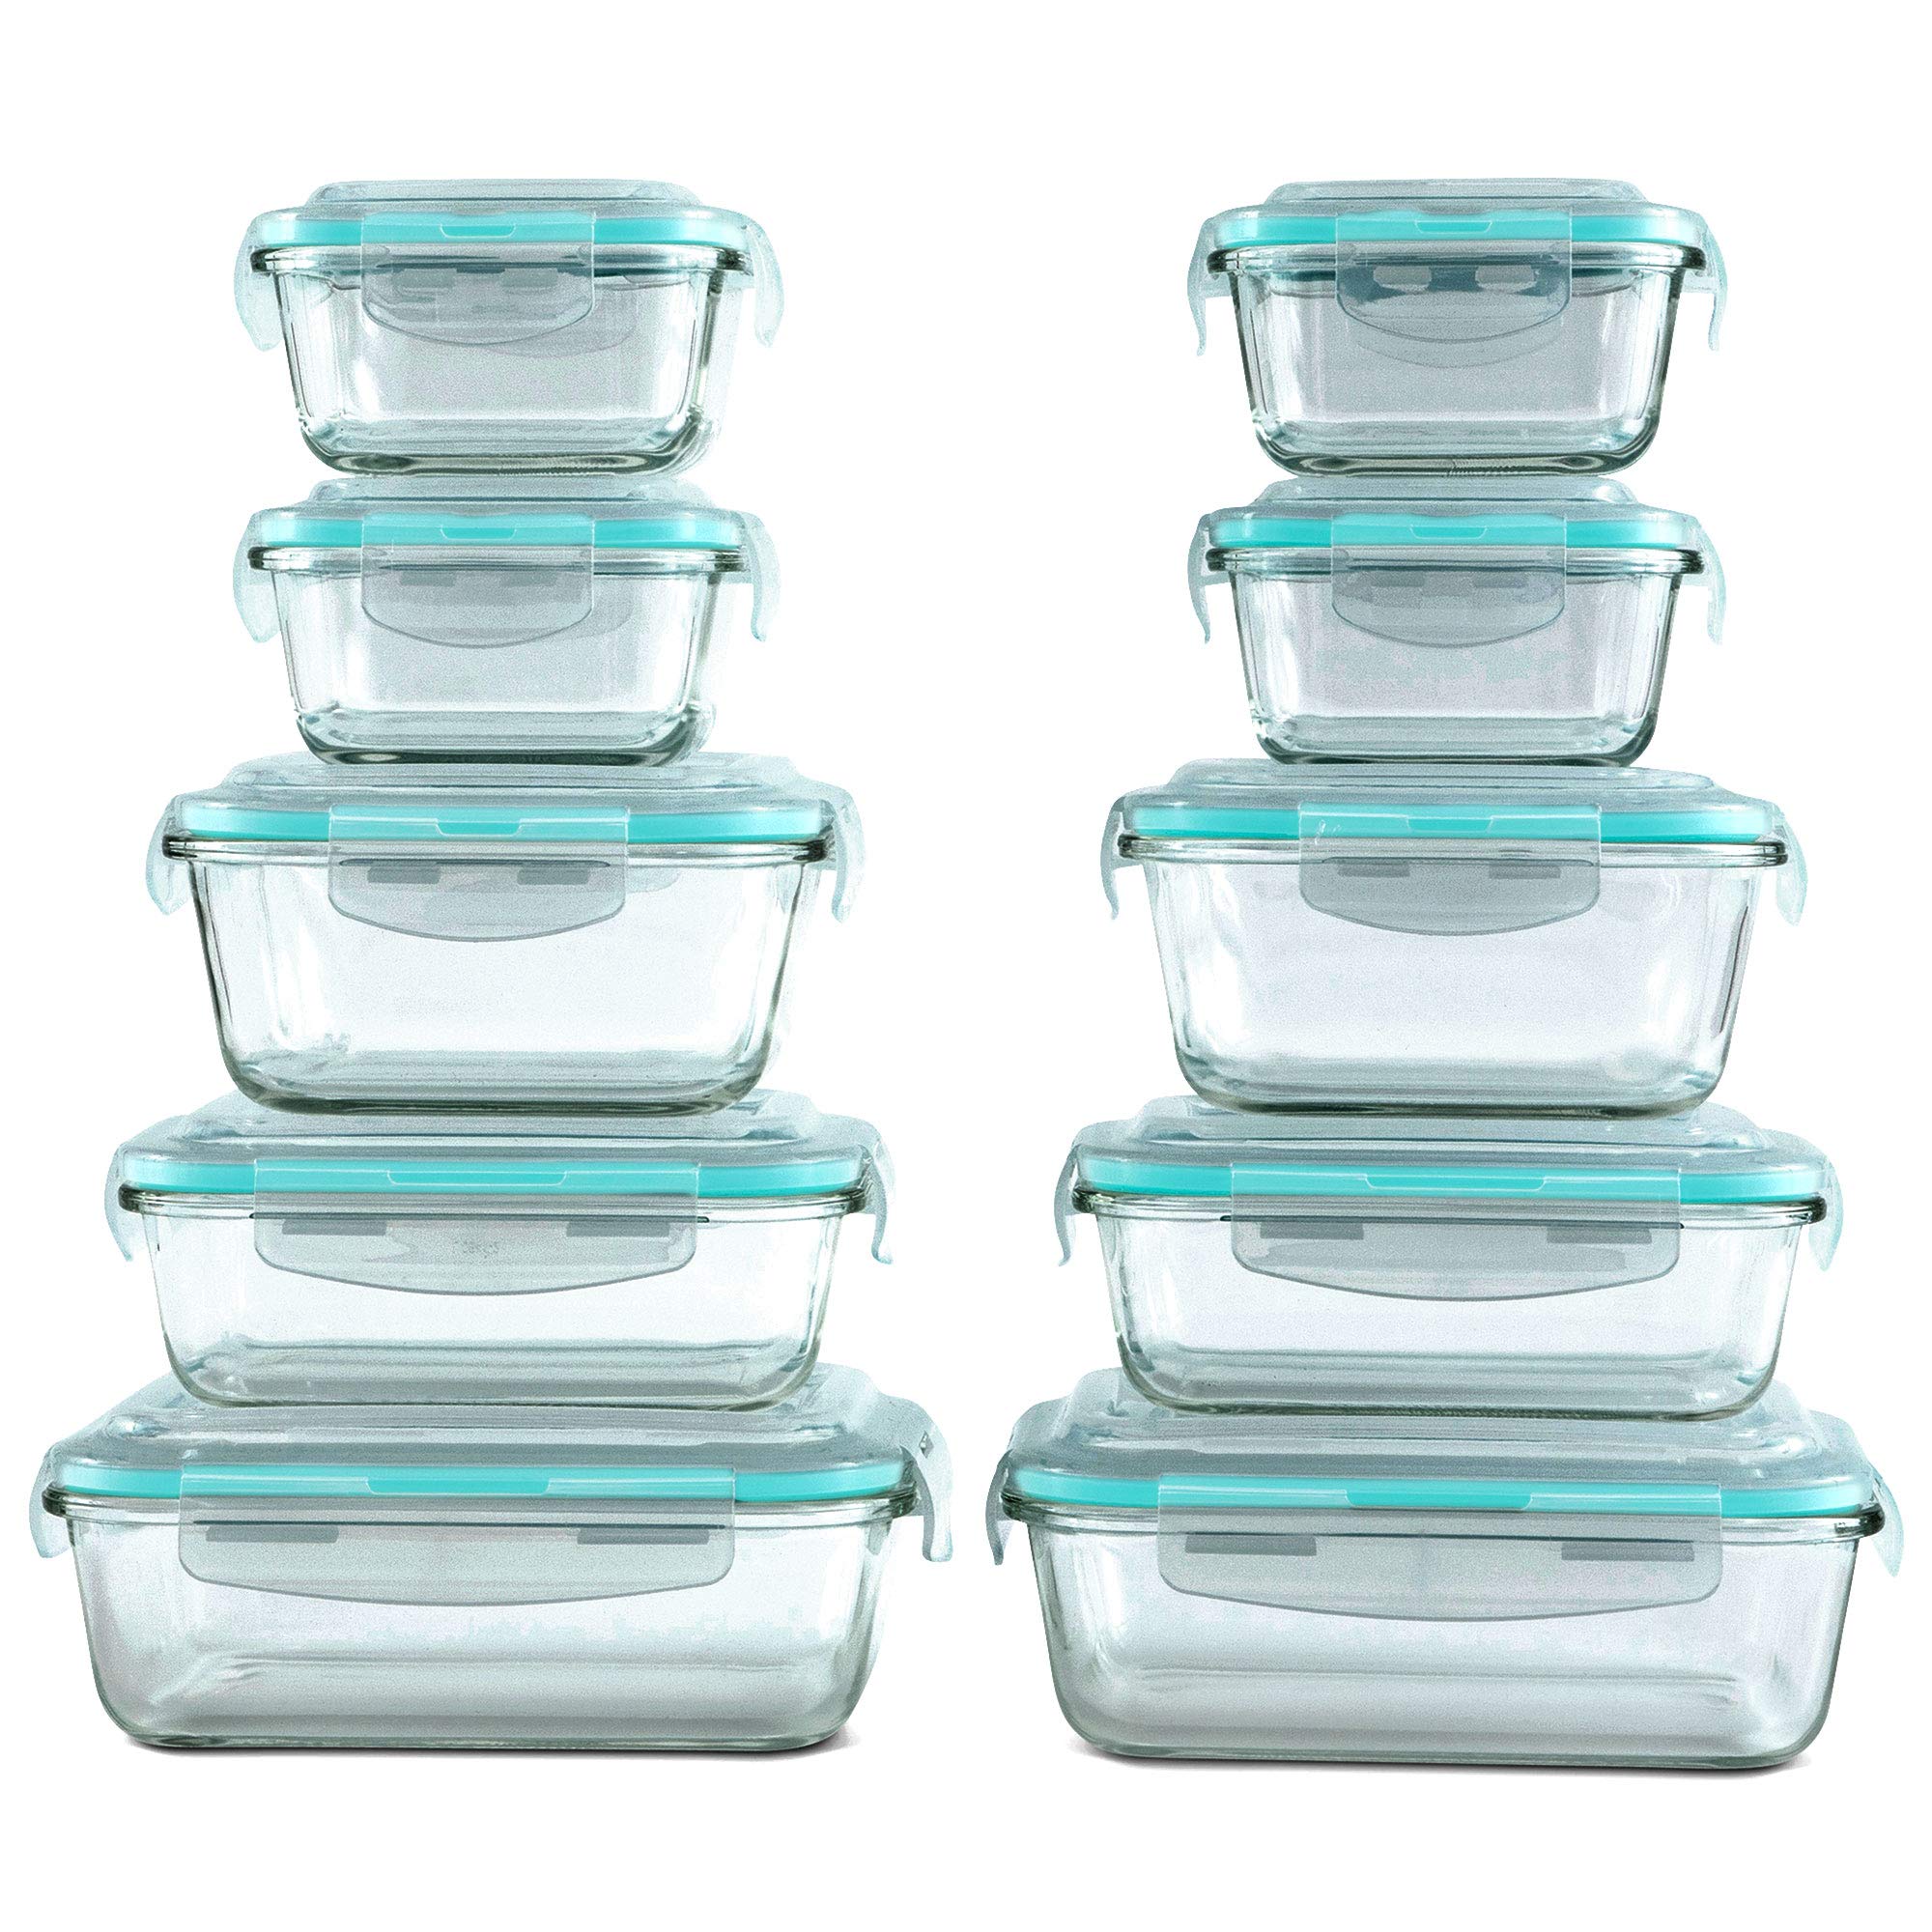 Book Cover Vallo [20 Piece] Glass Food Storage Containers Set with Snap Lock Lids - Safe for Microwave, Oven, Dishwasher, Freezer - BPA Free - Airtight & Leakproof